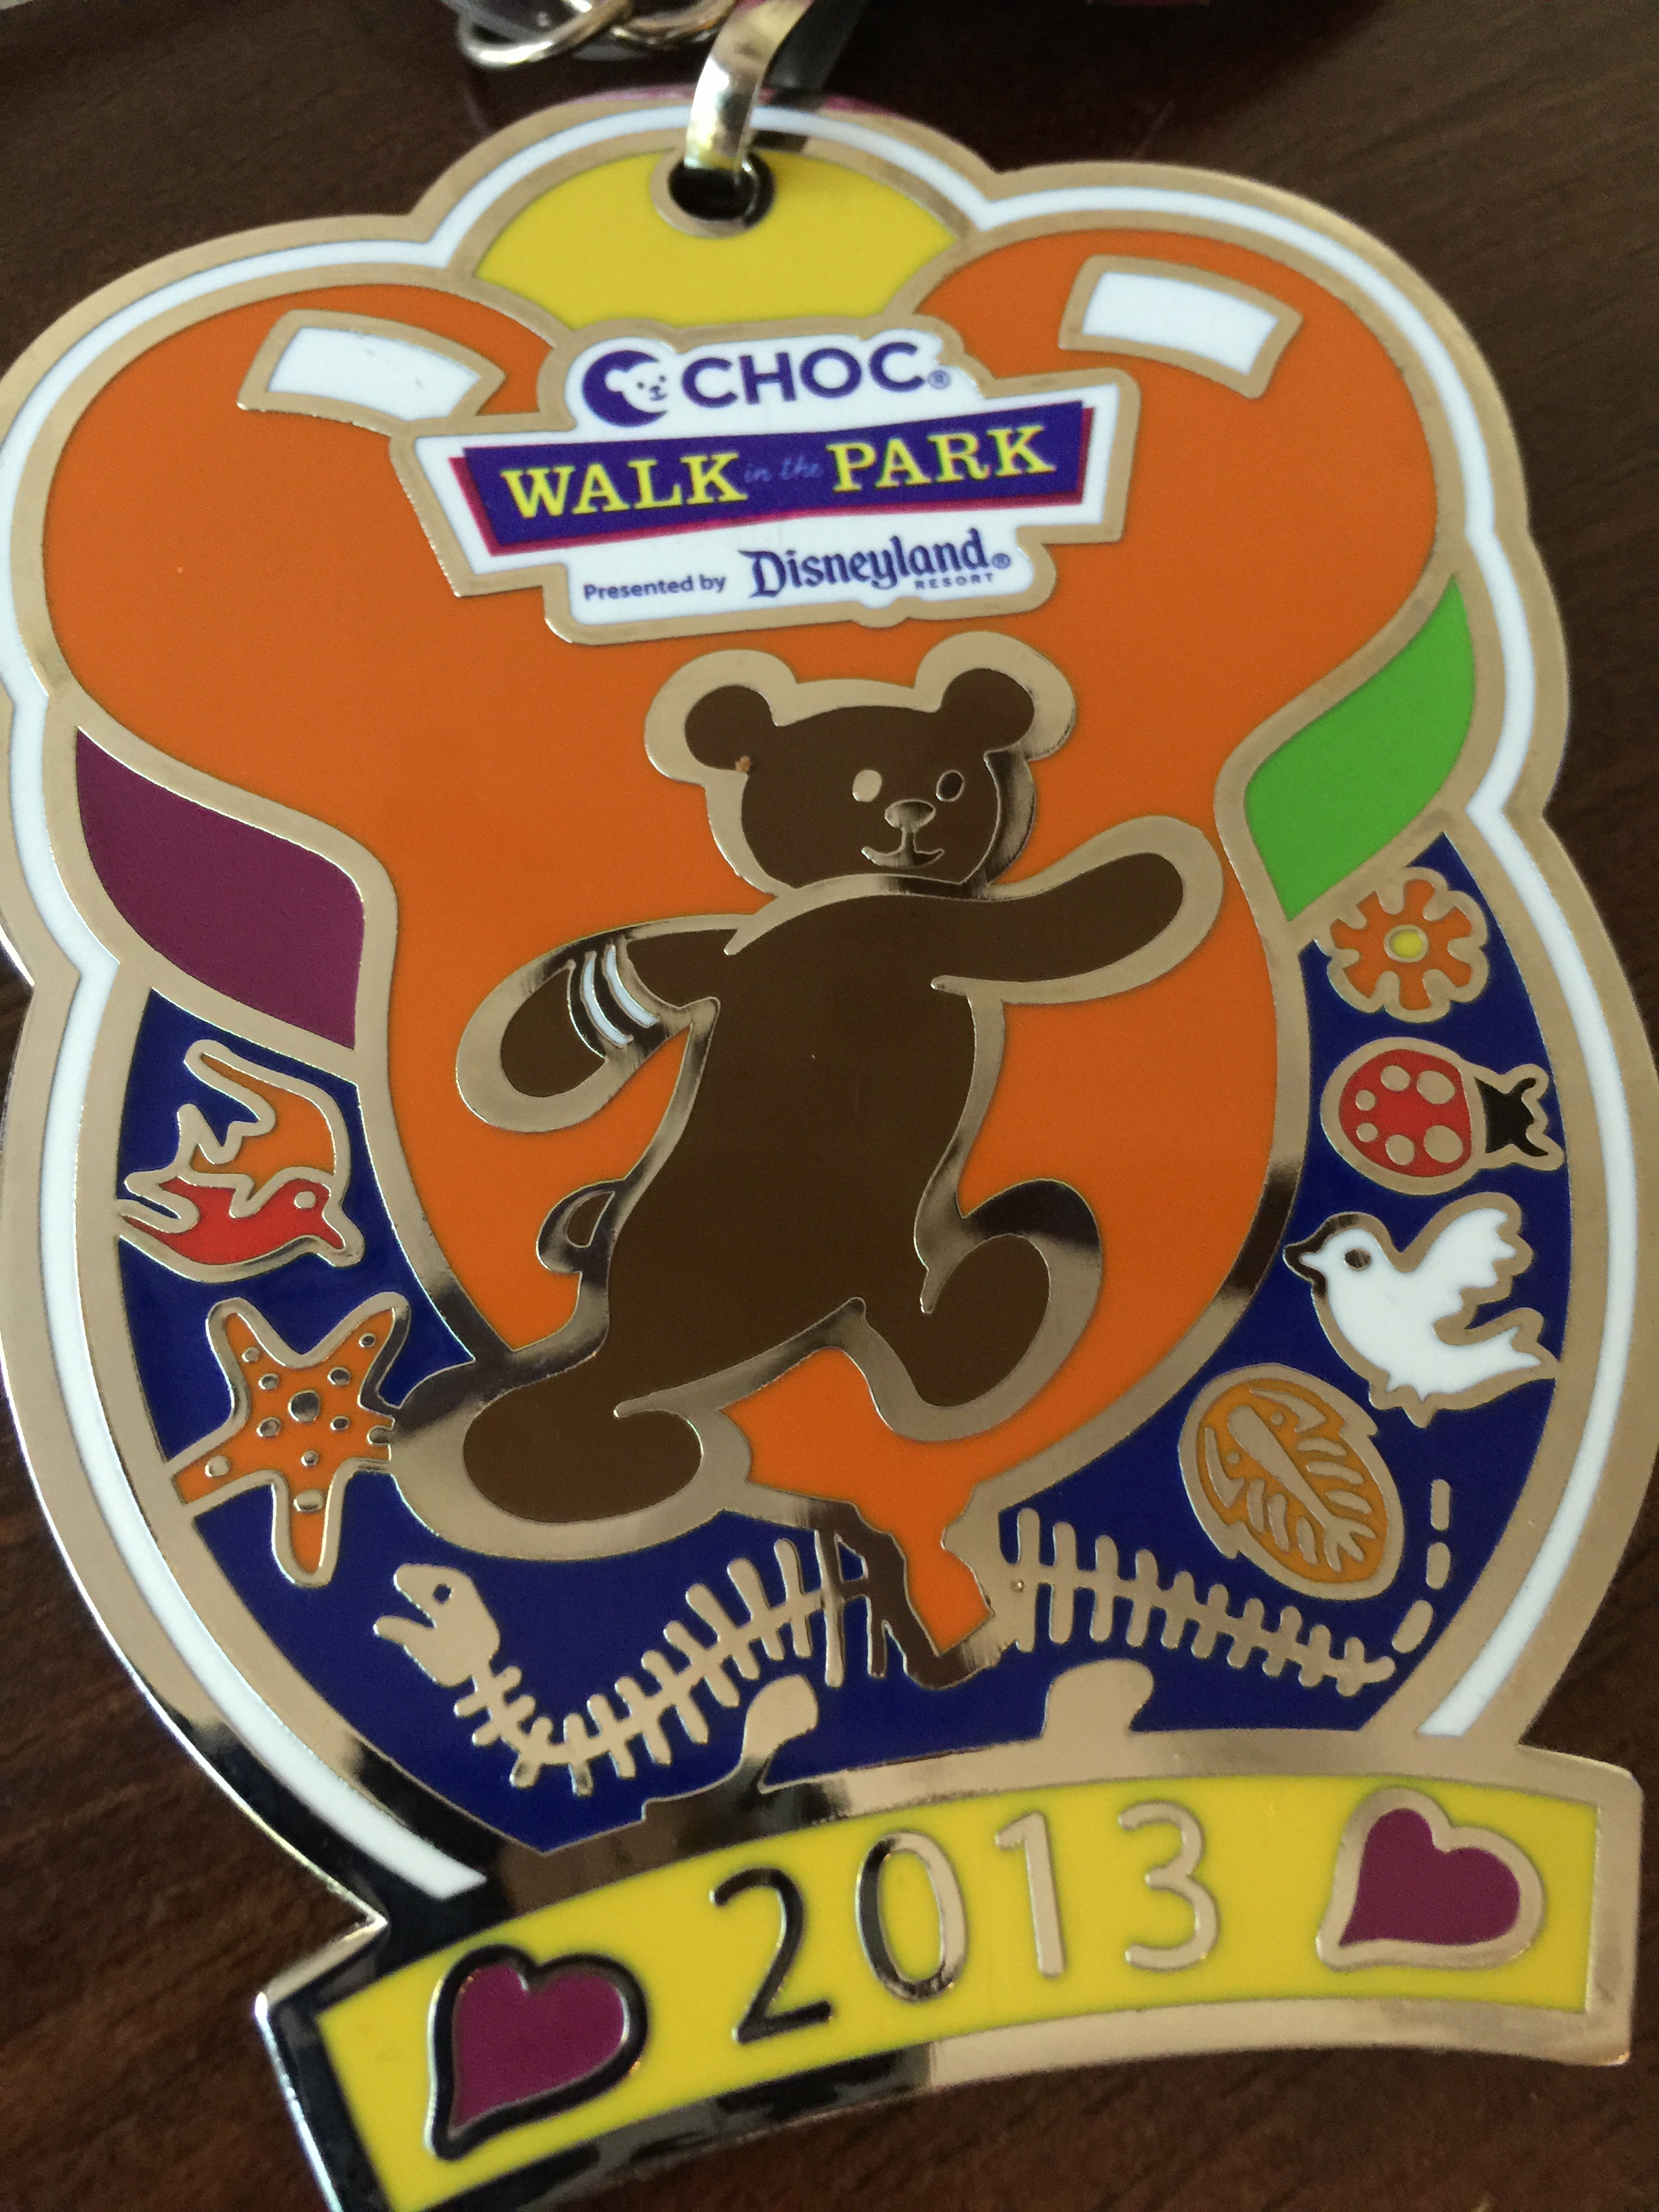 5 Benefits of Participating In the CHOC Walk In The Park at Disneyland